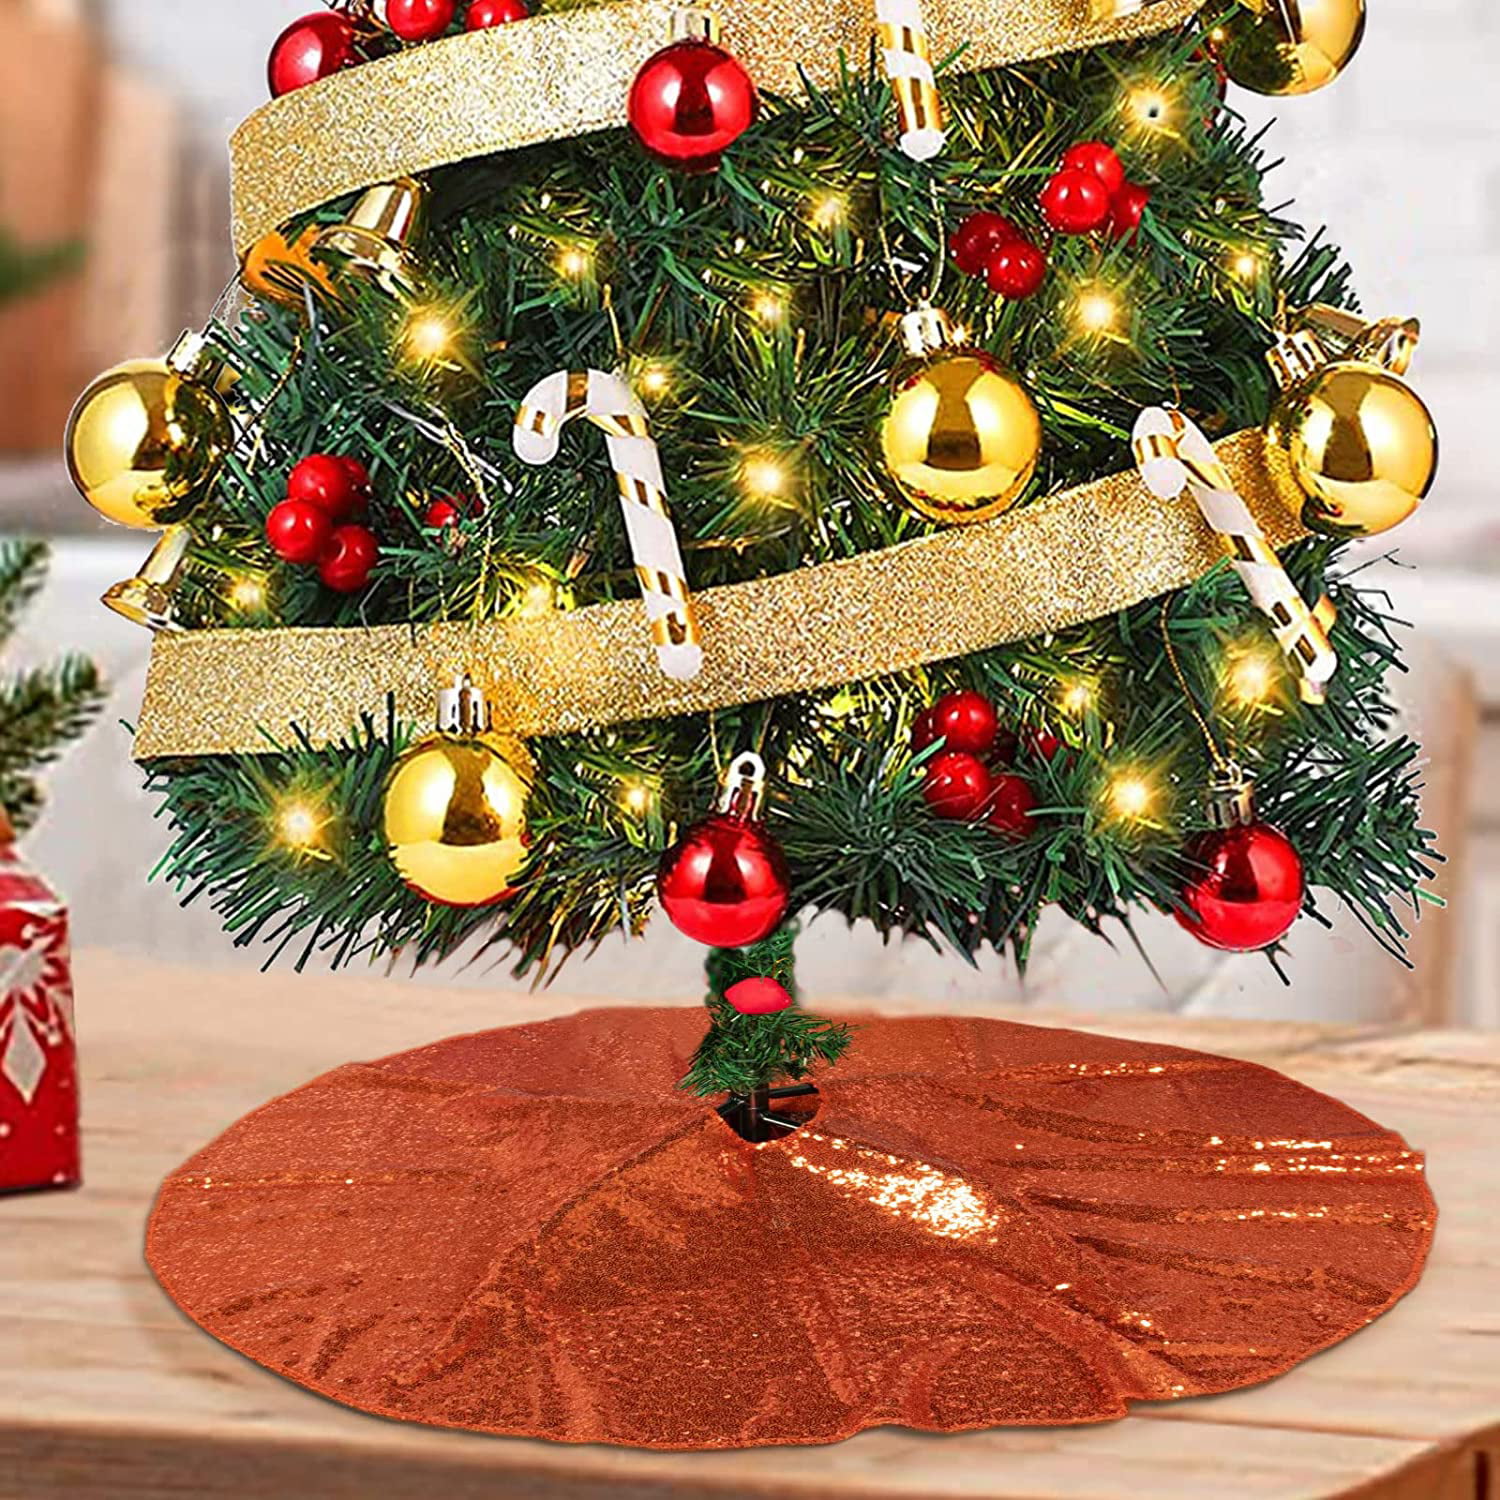 Details about   Christmas Pendant Ornaments Hanging Gifts Christmas Tree Ornament Decorat LZ 